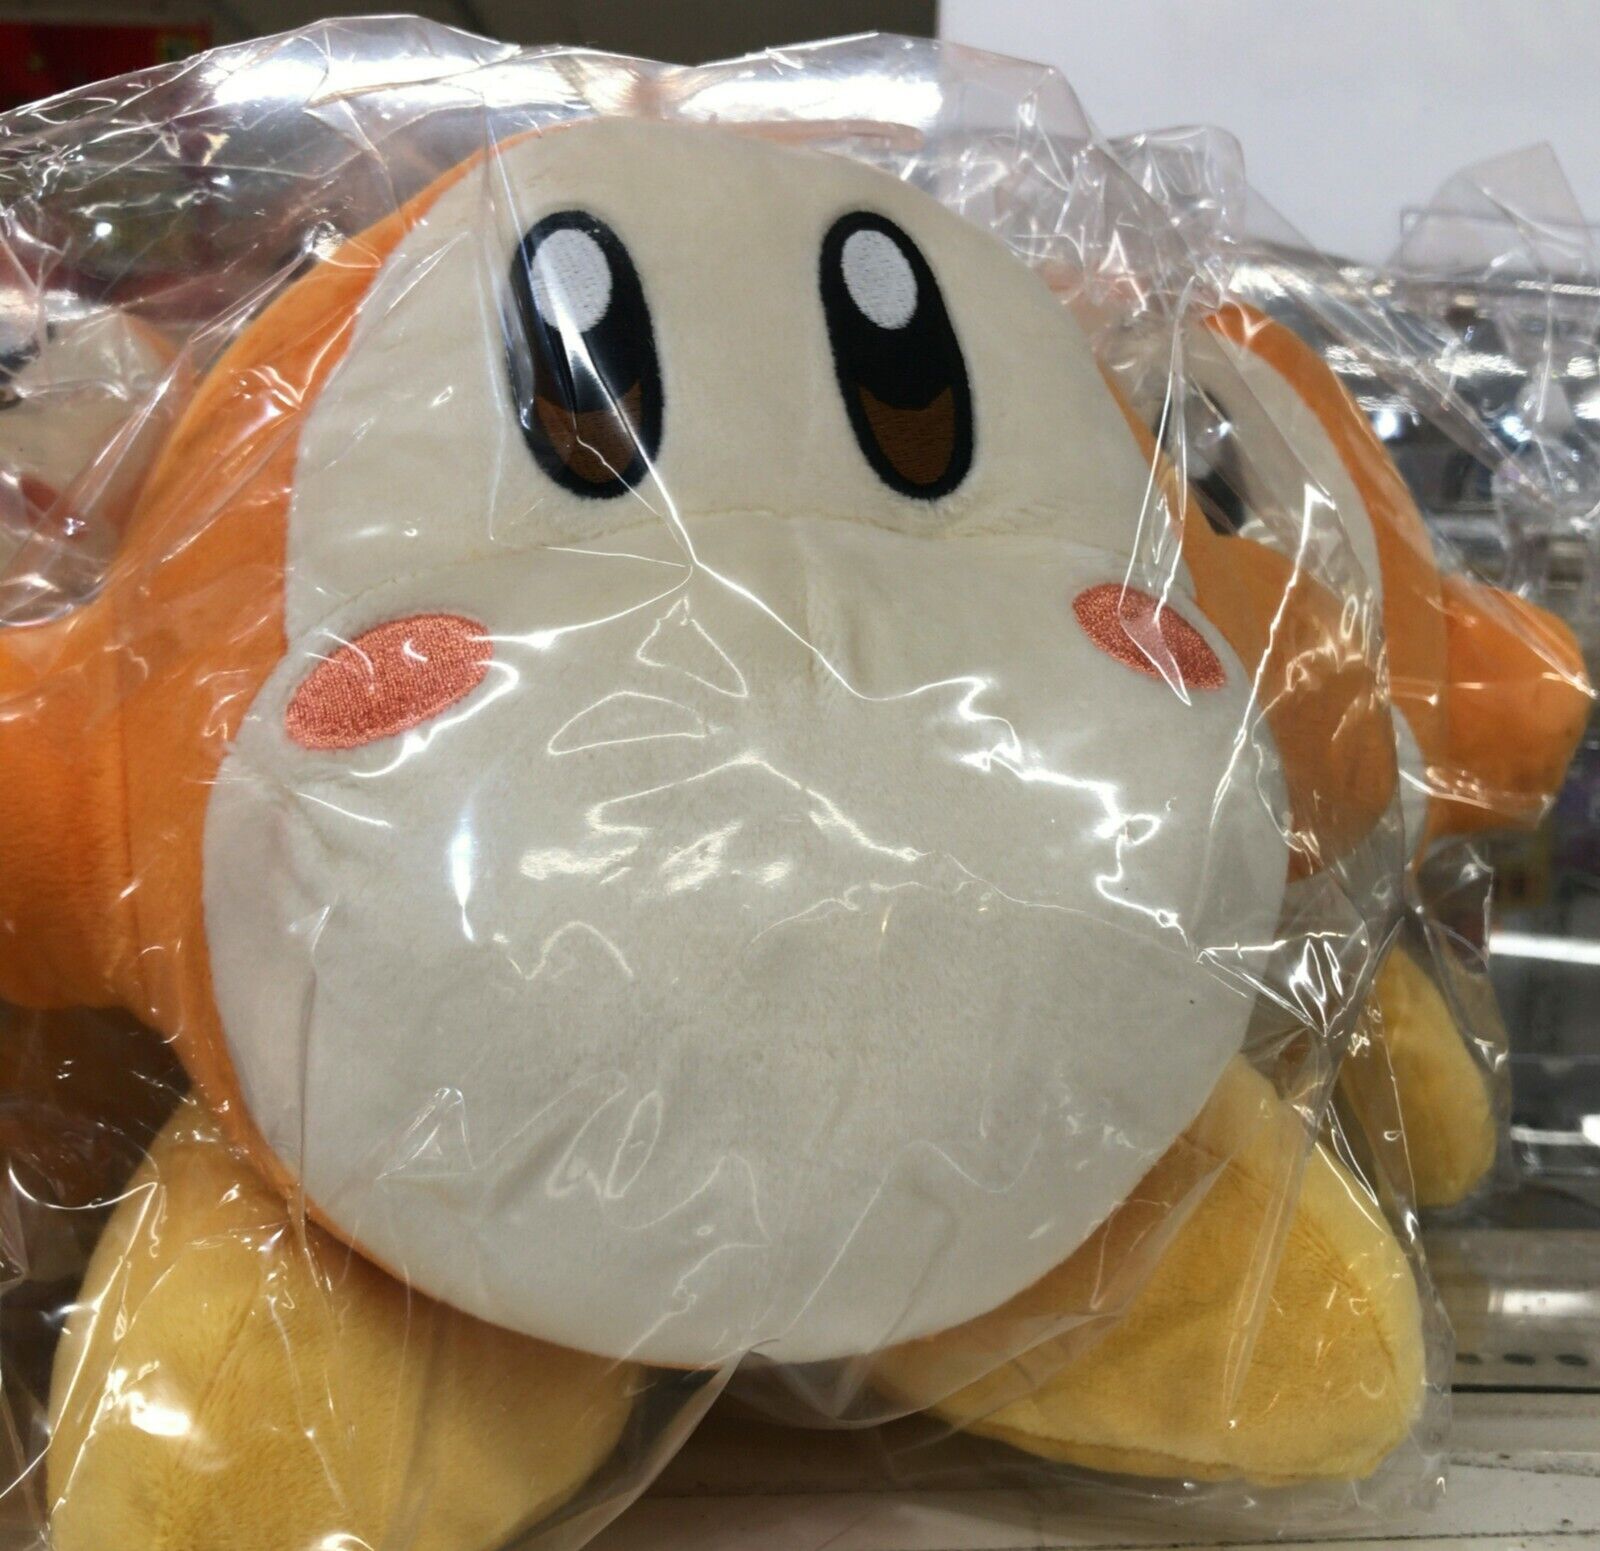 Star Kirby ALL STAR COLLECTION Stuffed Toy M Size Waddle Dee Plush Doll KP42 New